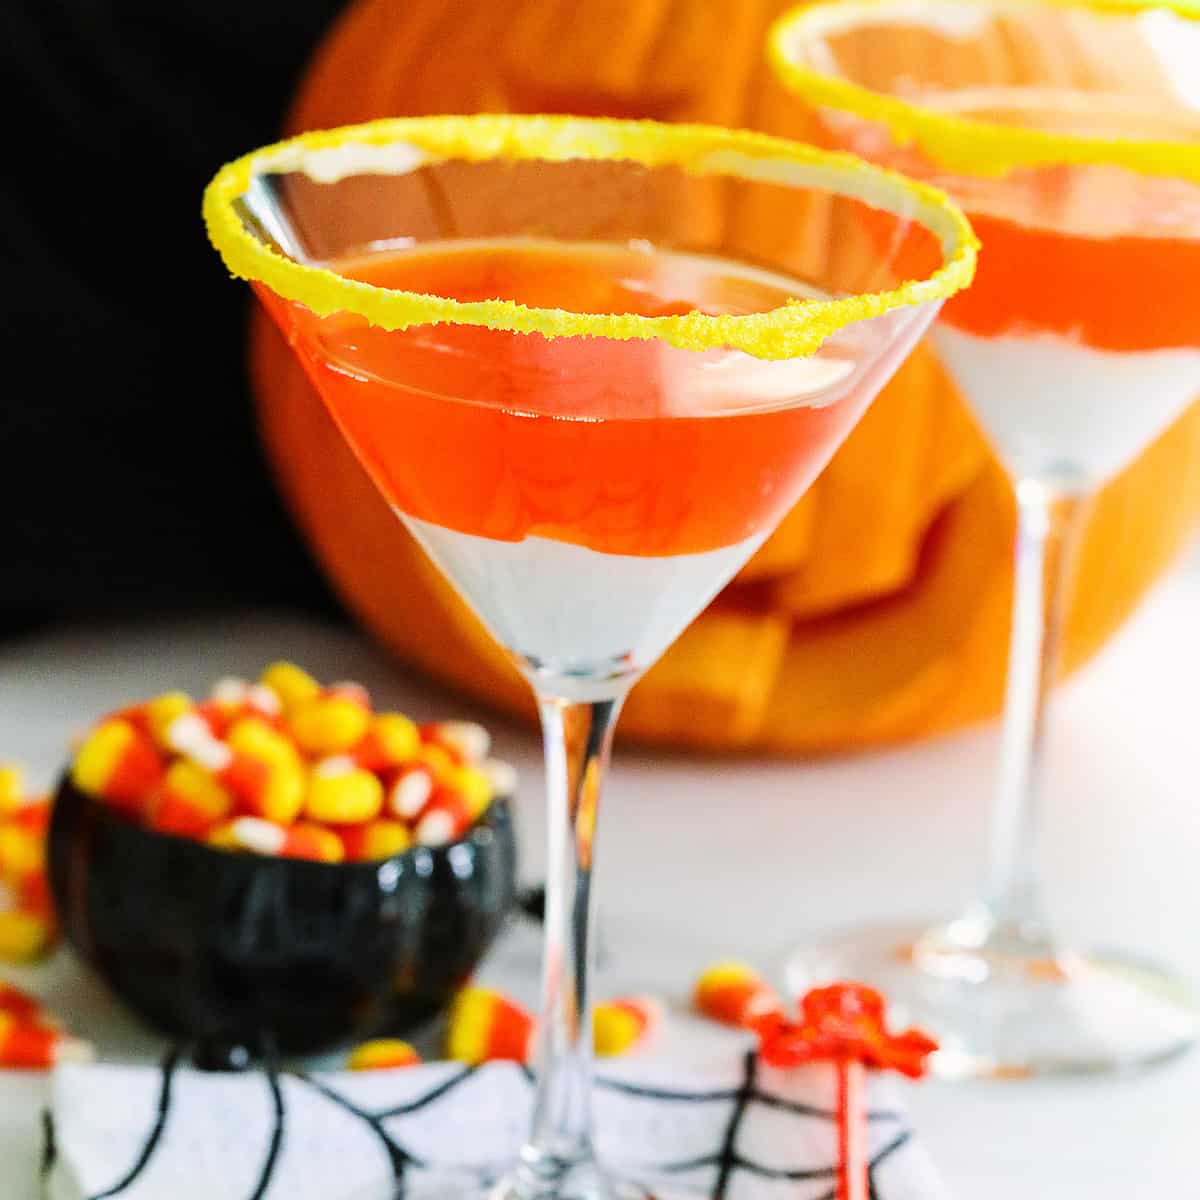 A Halloween party with candy corn martinis and a small black dish of candy corn nearby.